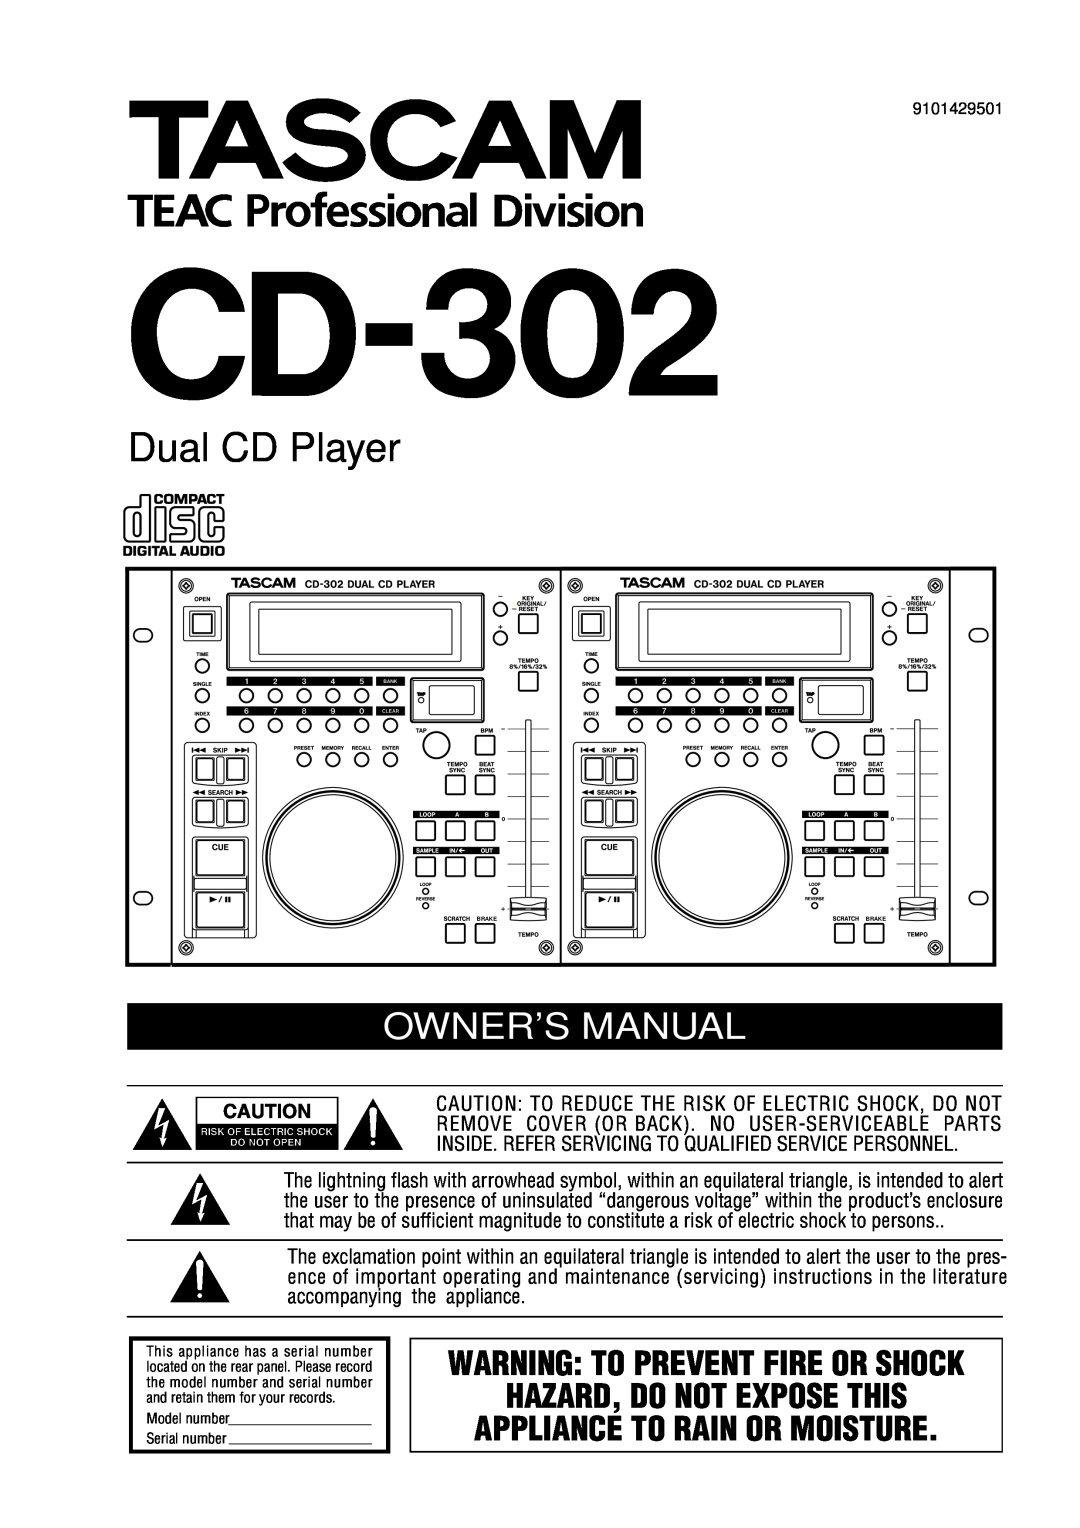 Tascam CD-302 owner manual Dual CD Player, Hazard, Do Not Expose This, Appliance To Rain Or Moisture, Brake 